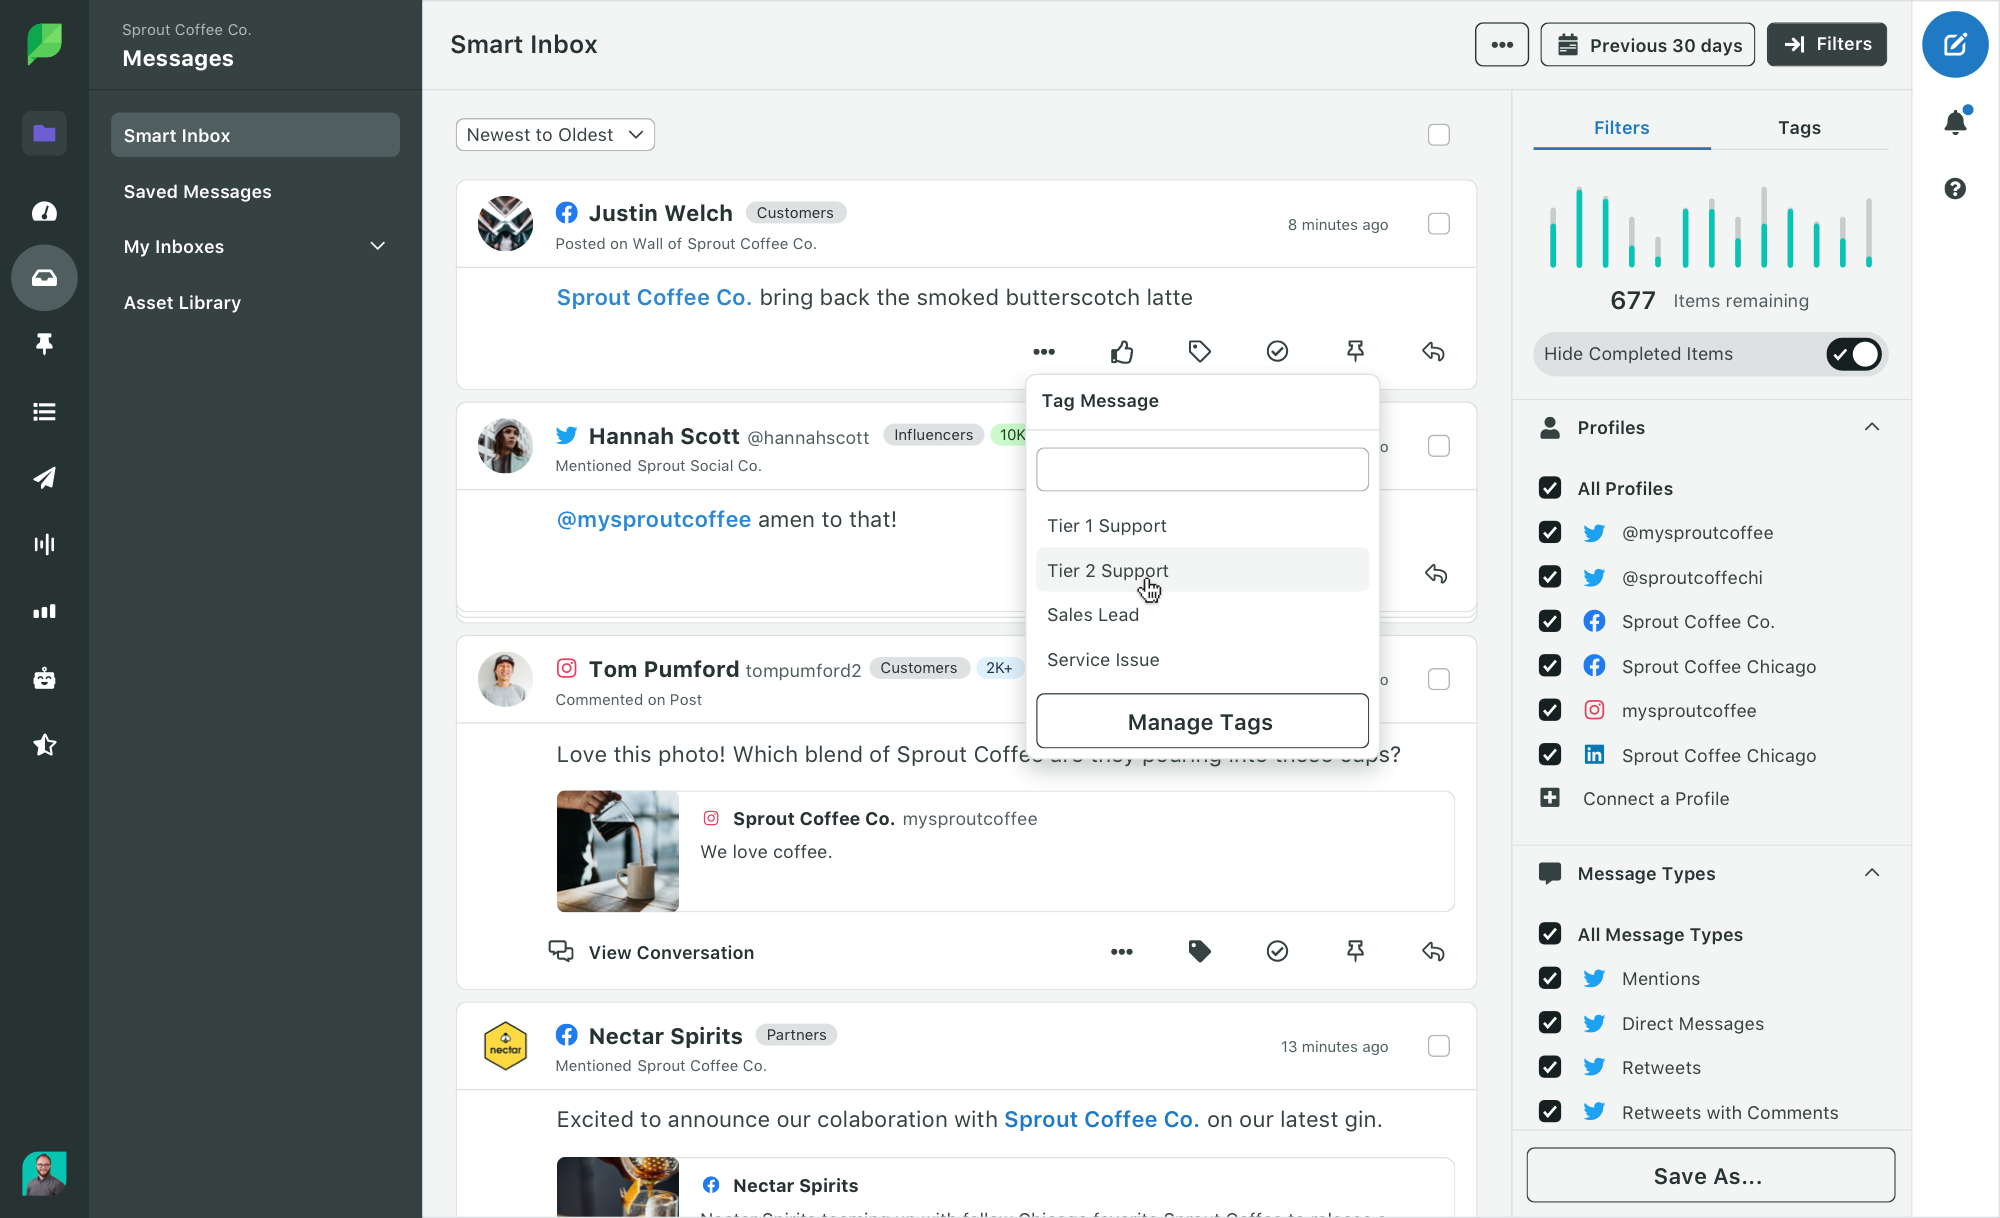 Screenshot of the Sprout Social Smart Inbox showcasing message tagging for customer support escalation. A message is being tagged for Tier 2 Support.